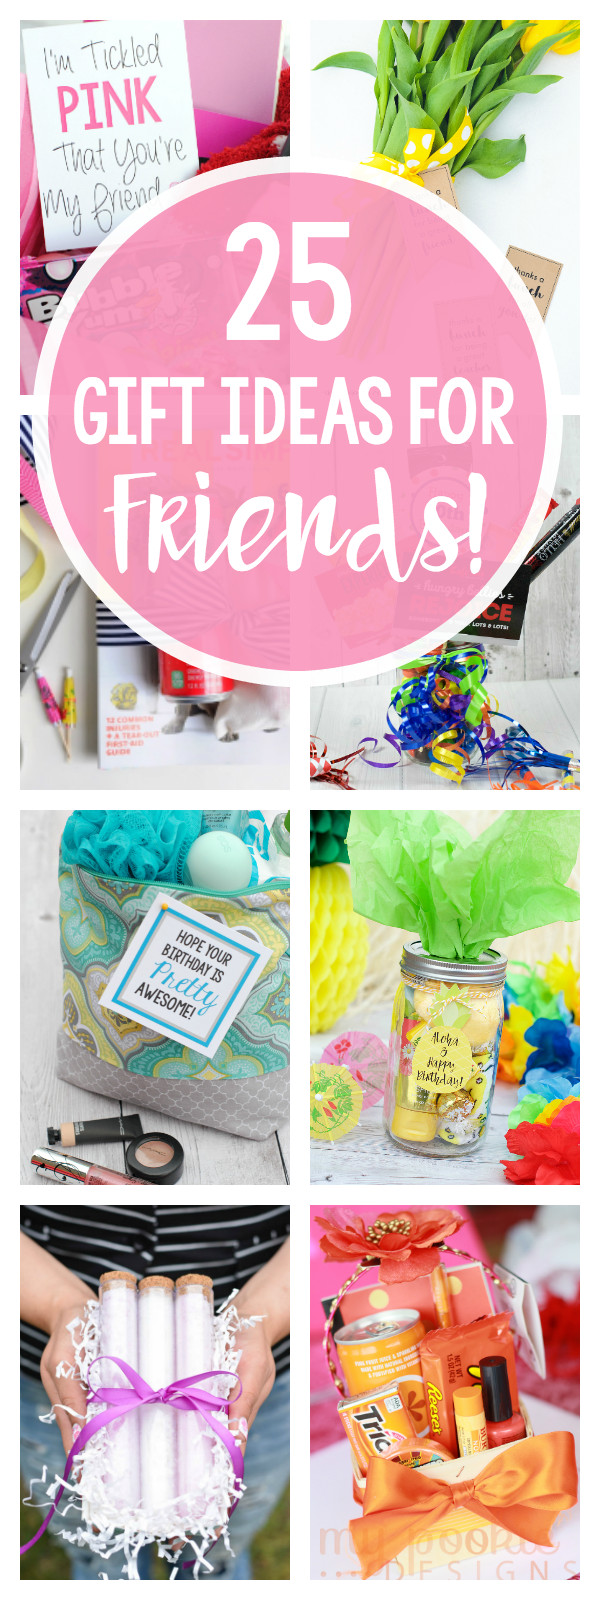 Best Friend Gift Ideas Pinterest
 25 Fun Gifts for Best Friends for Any Occasion – Fun Squared